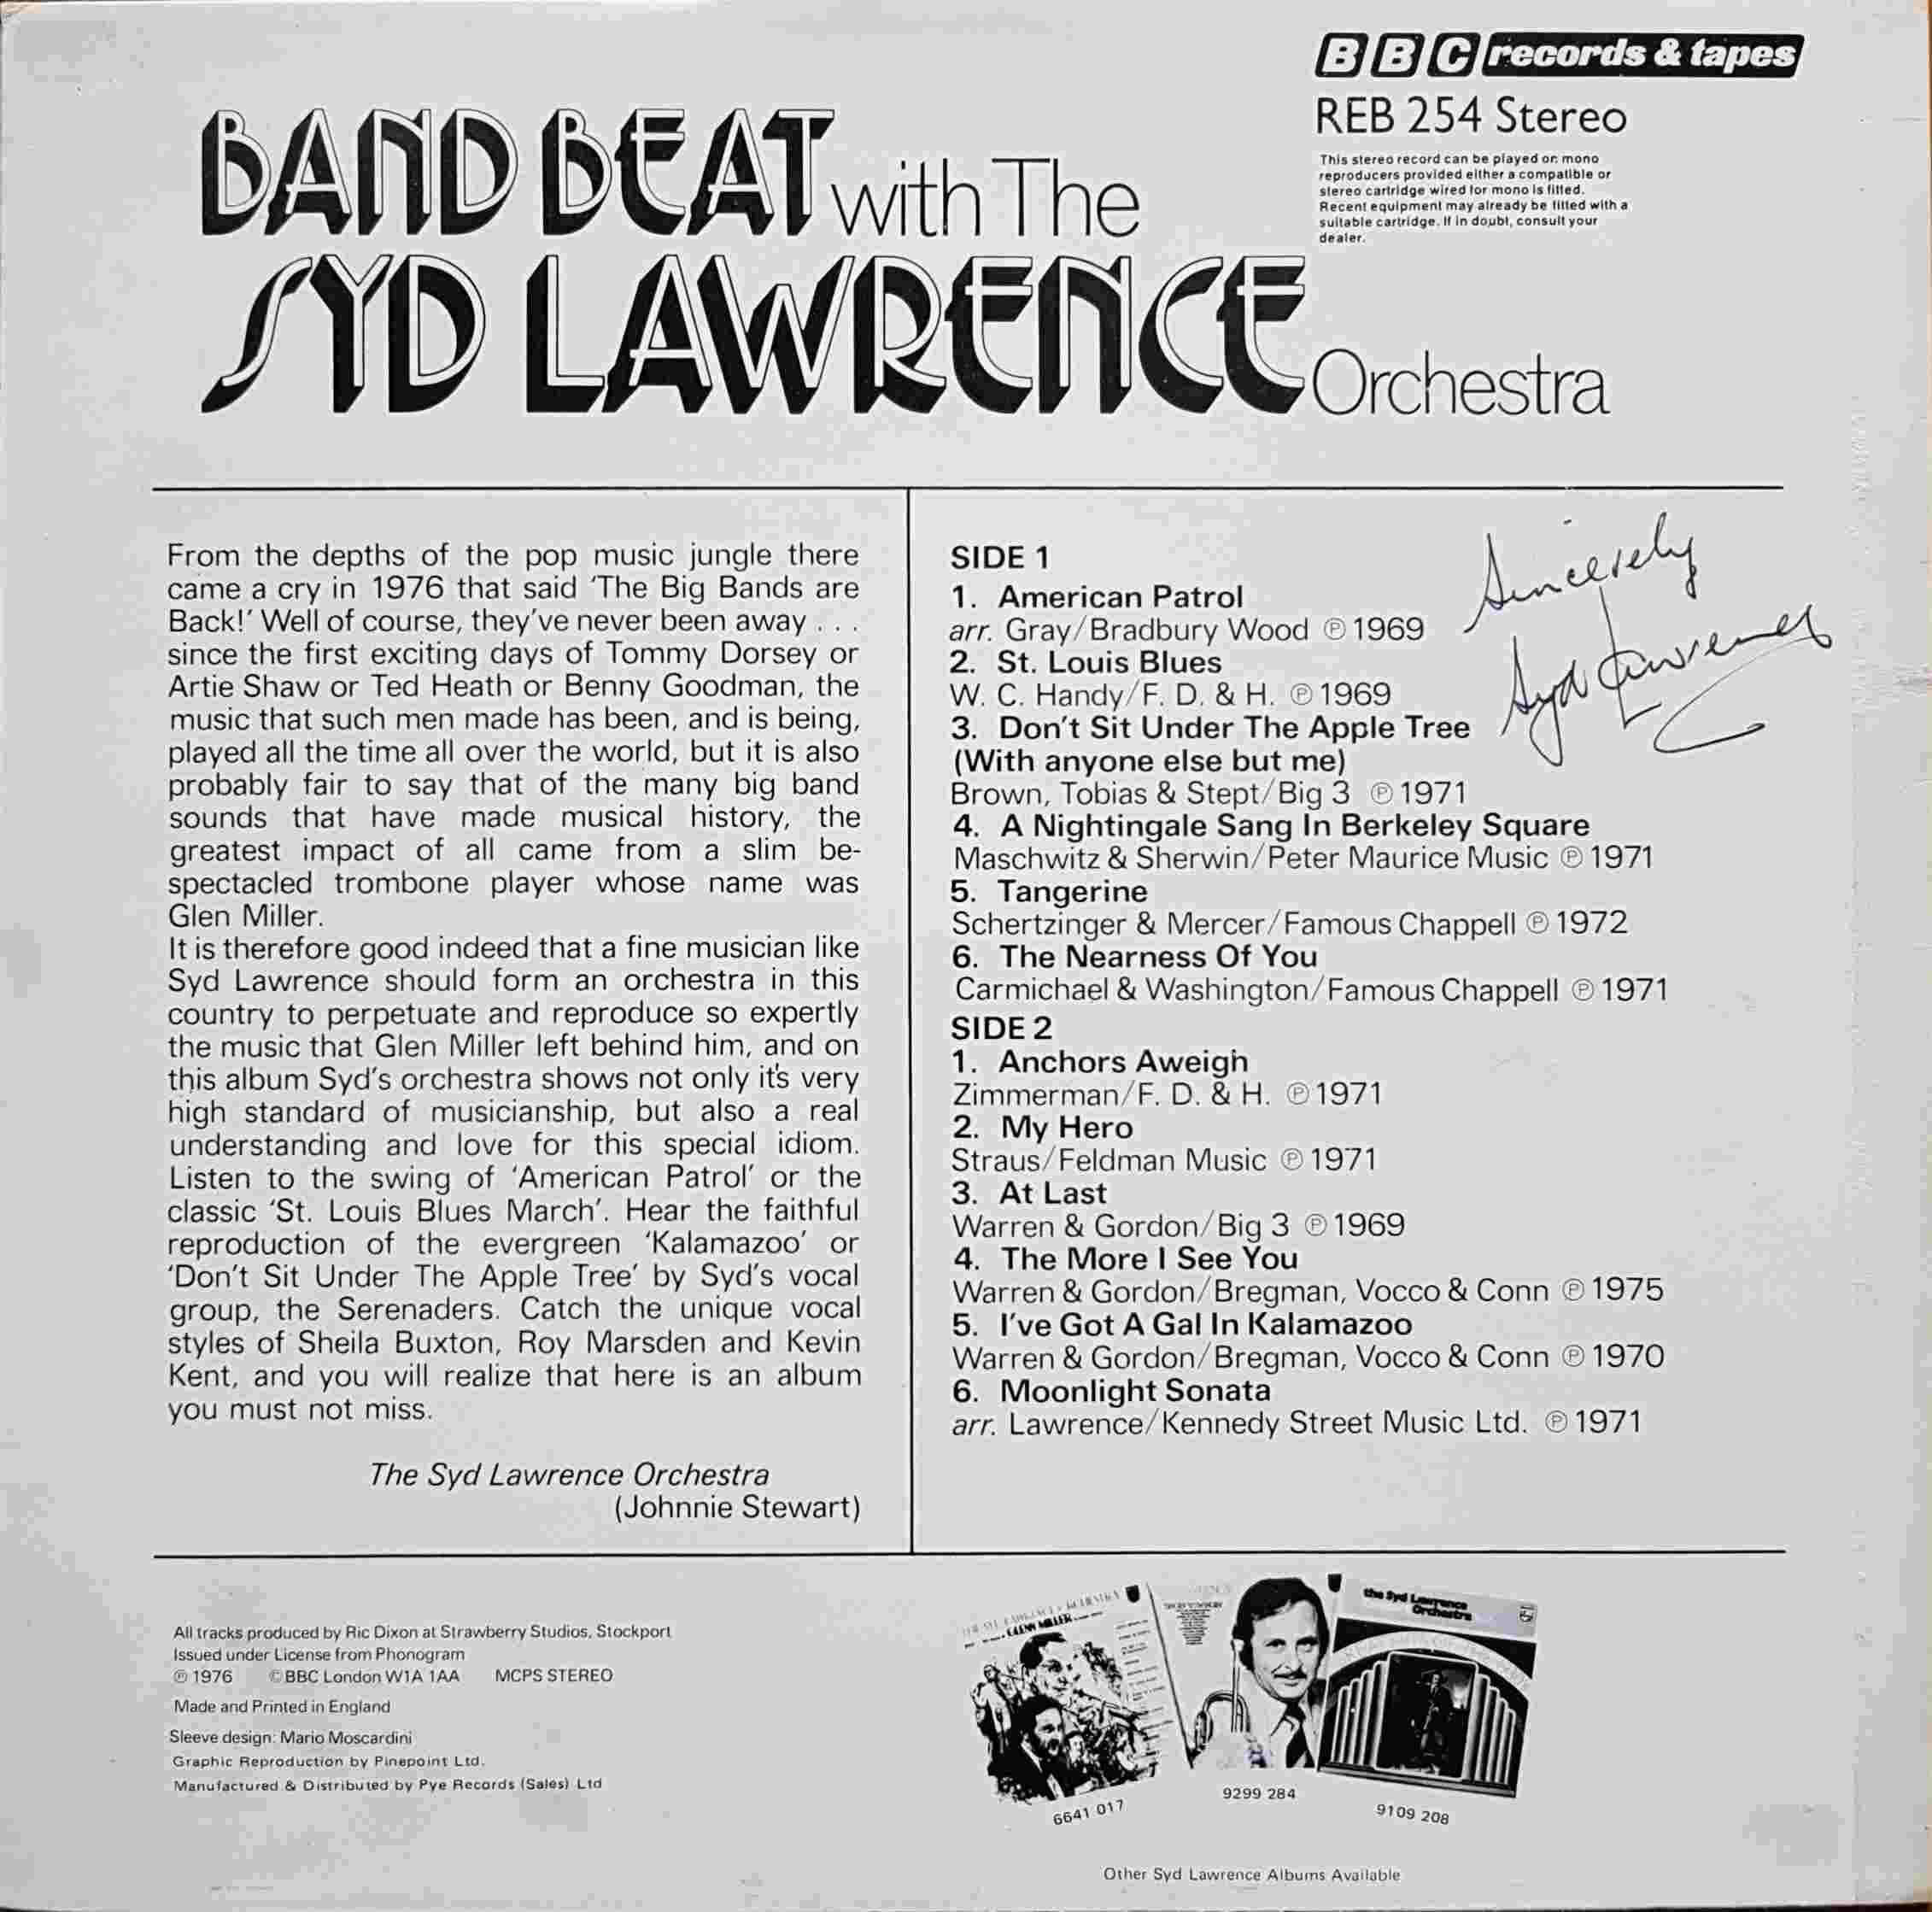 Picture of REB 254 Band beat by artist Syd Lawrence  from the BBC records and Tapes library